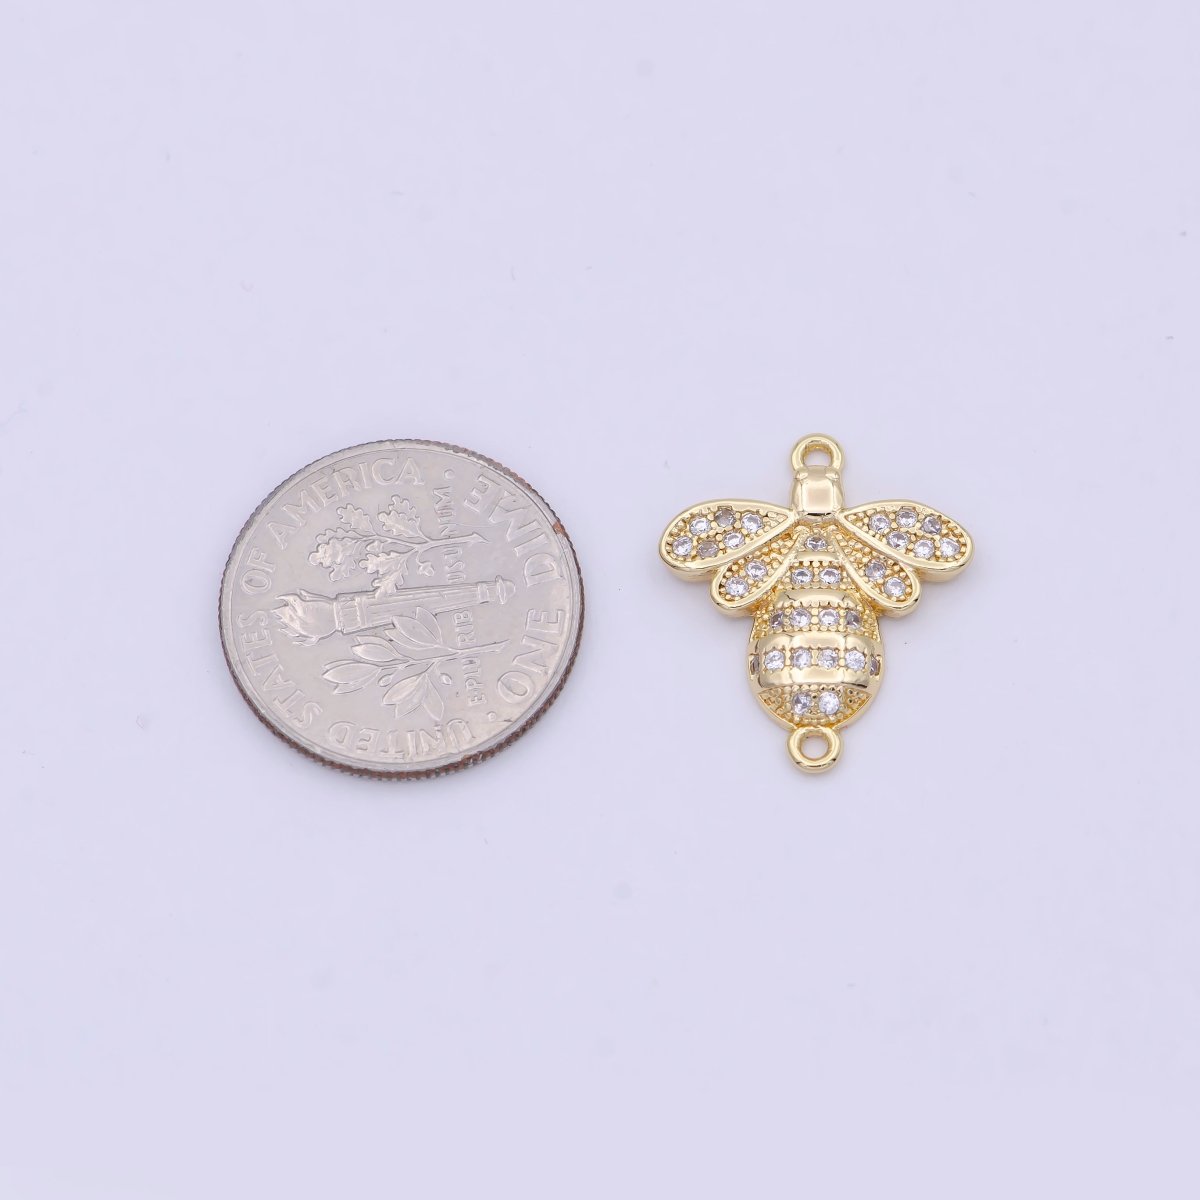 Gold Bee Charm, Insect Charms, Cute Charms, Bee Findings DIY Jewelry Projects Necklace Bracelet Earring Jewelry Supplies F-175 - DLUXCA